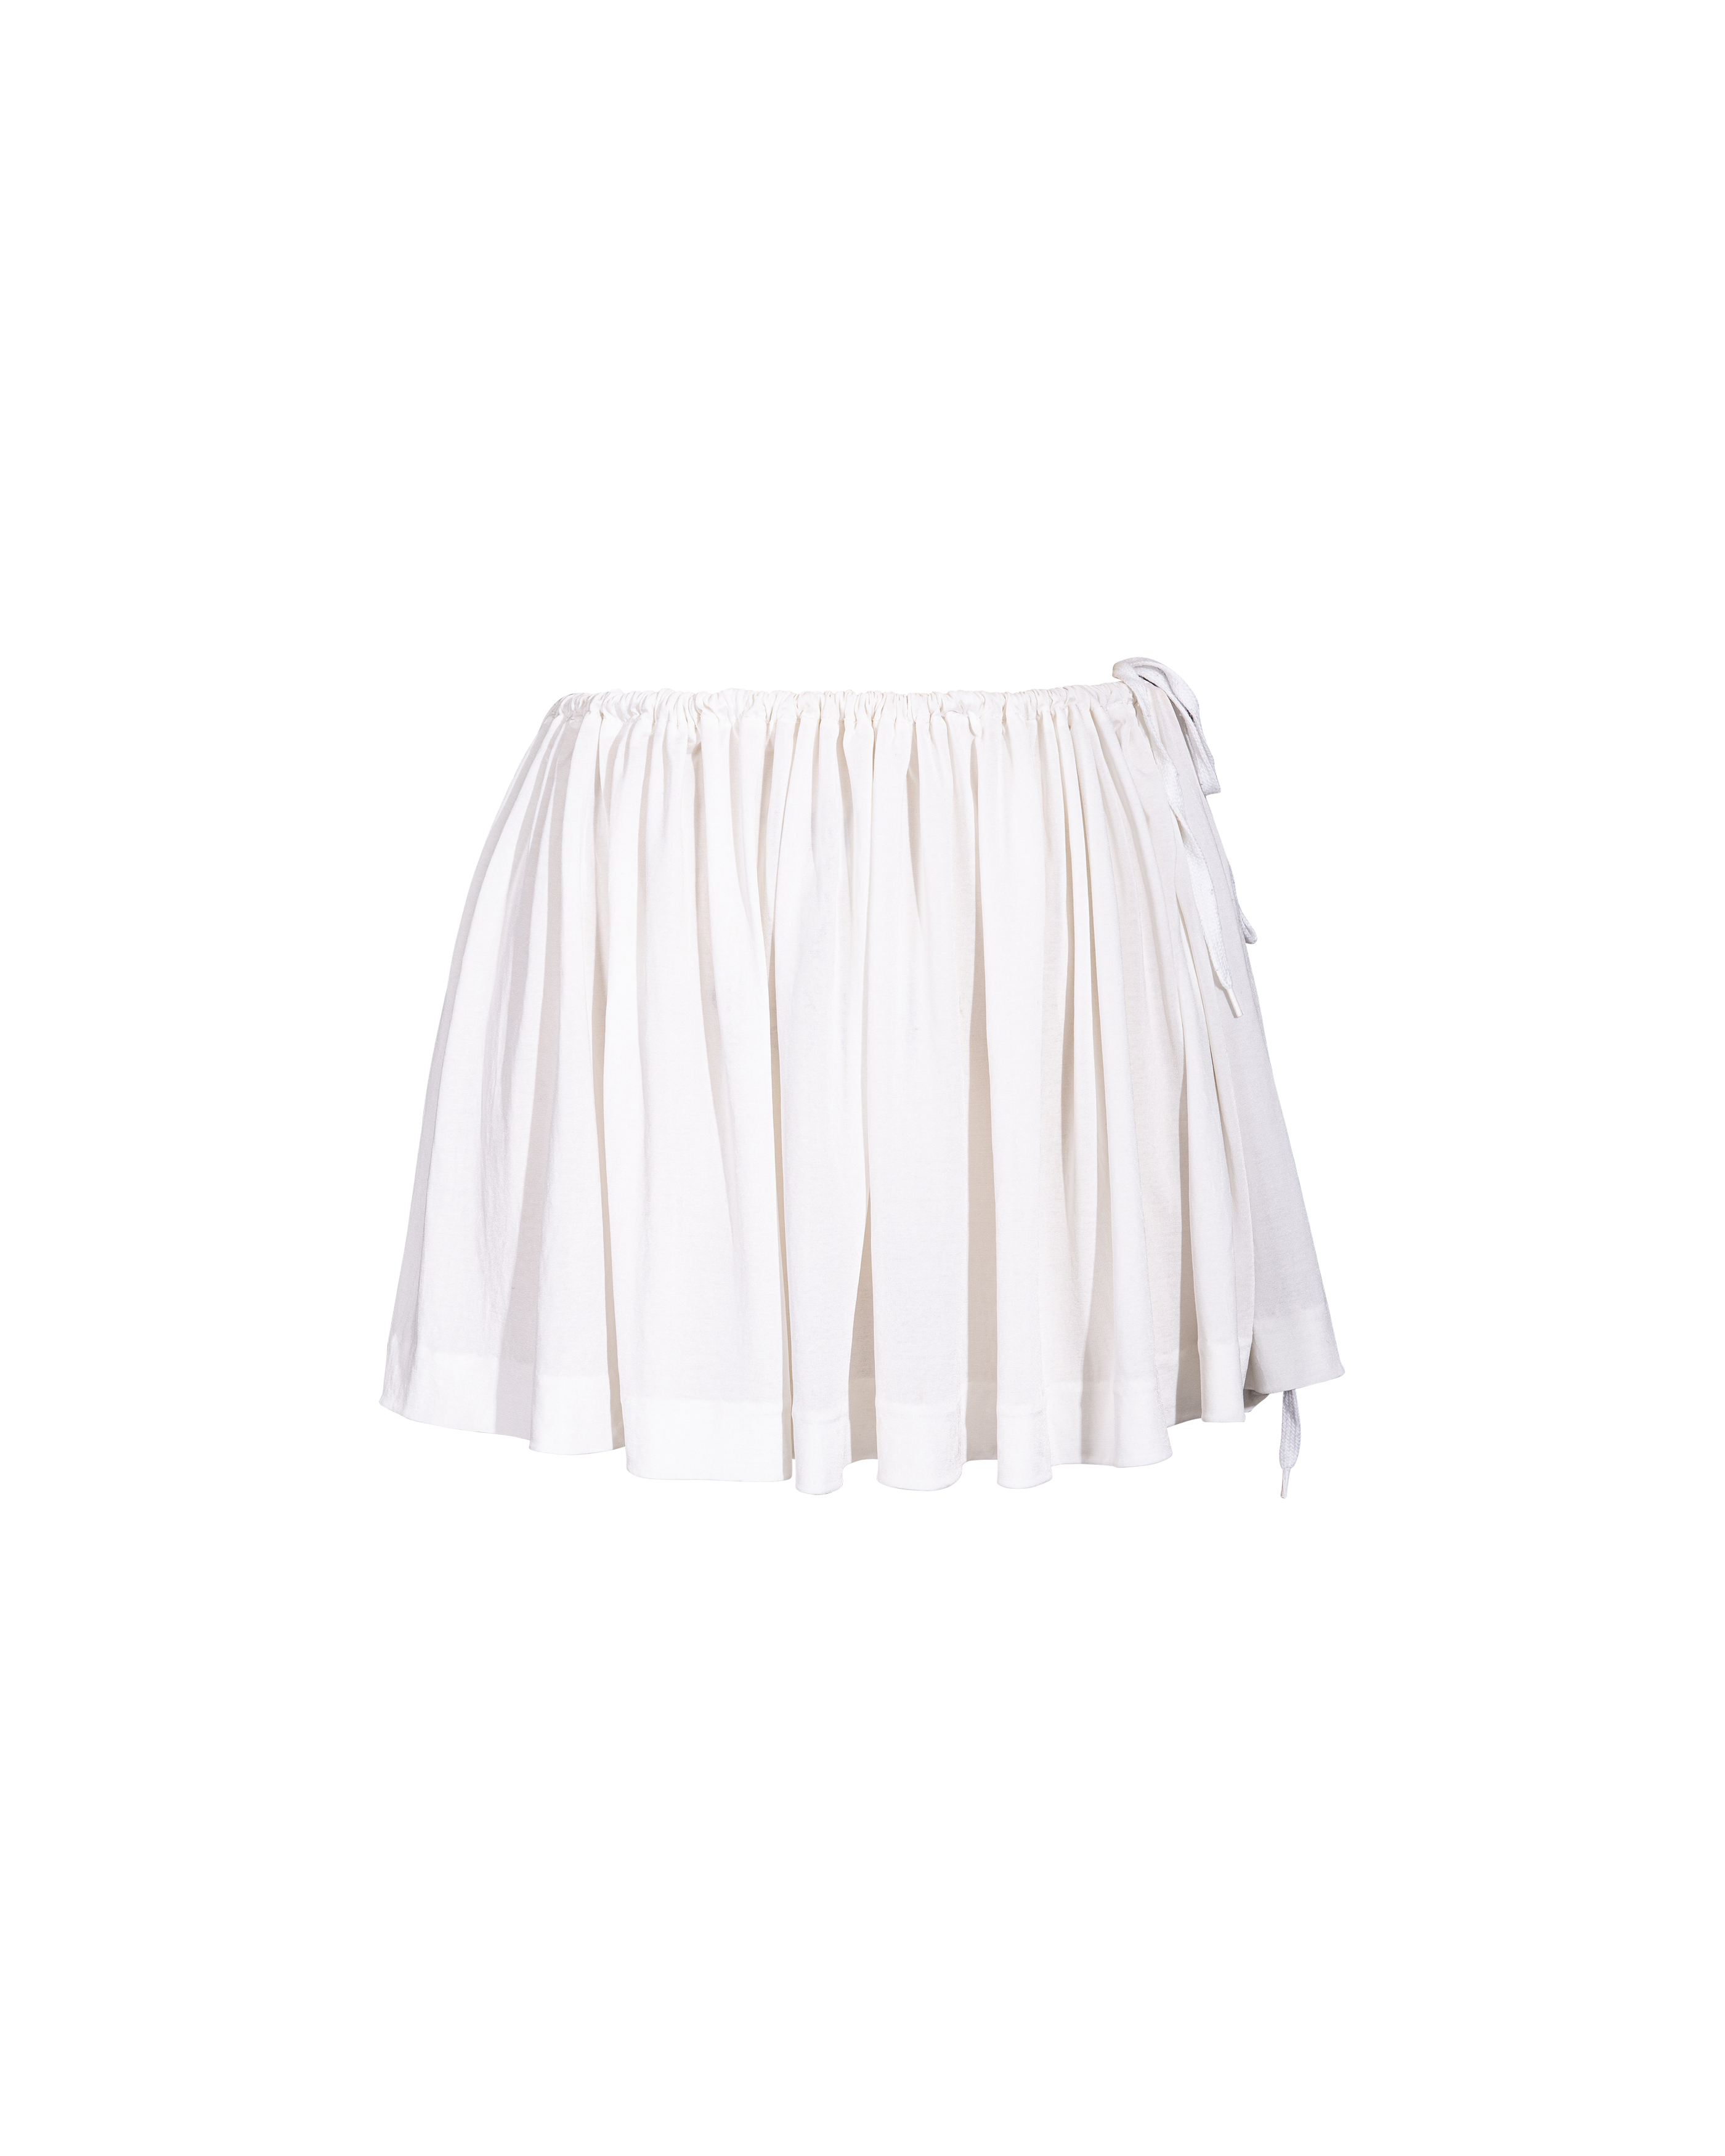 S/S 1988 White Mini Skirt with Removable Bustle